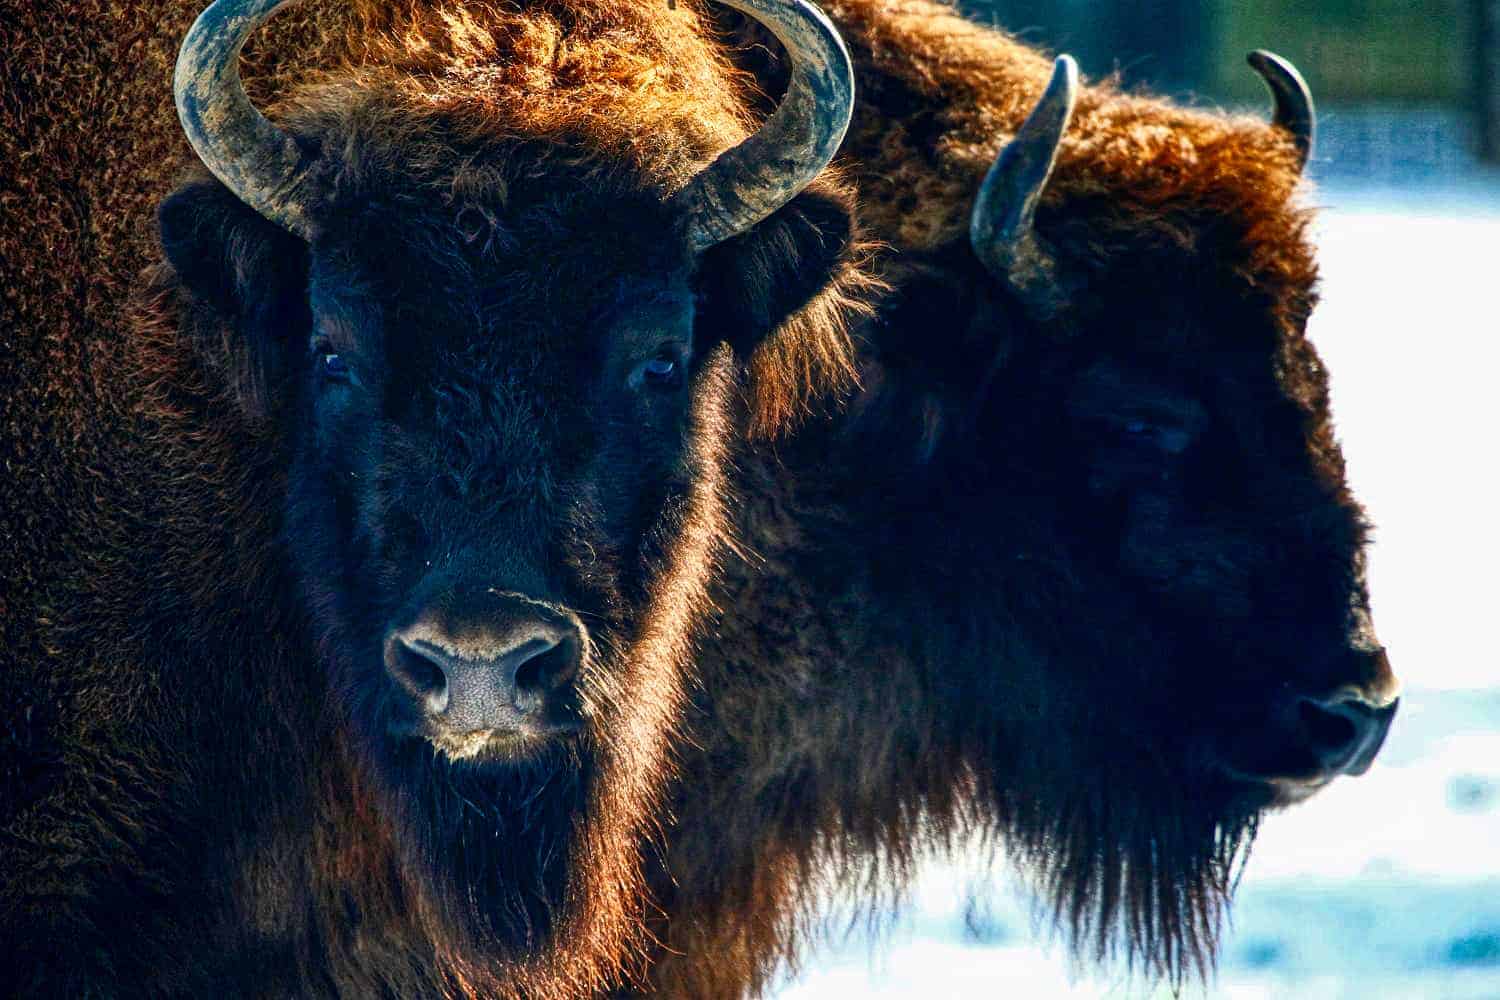 European bison recovering, thanks to continued conservation efforts – IUCN Red List